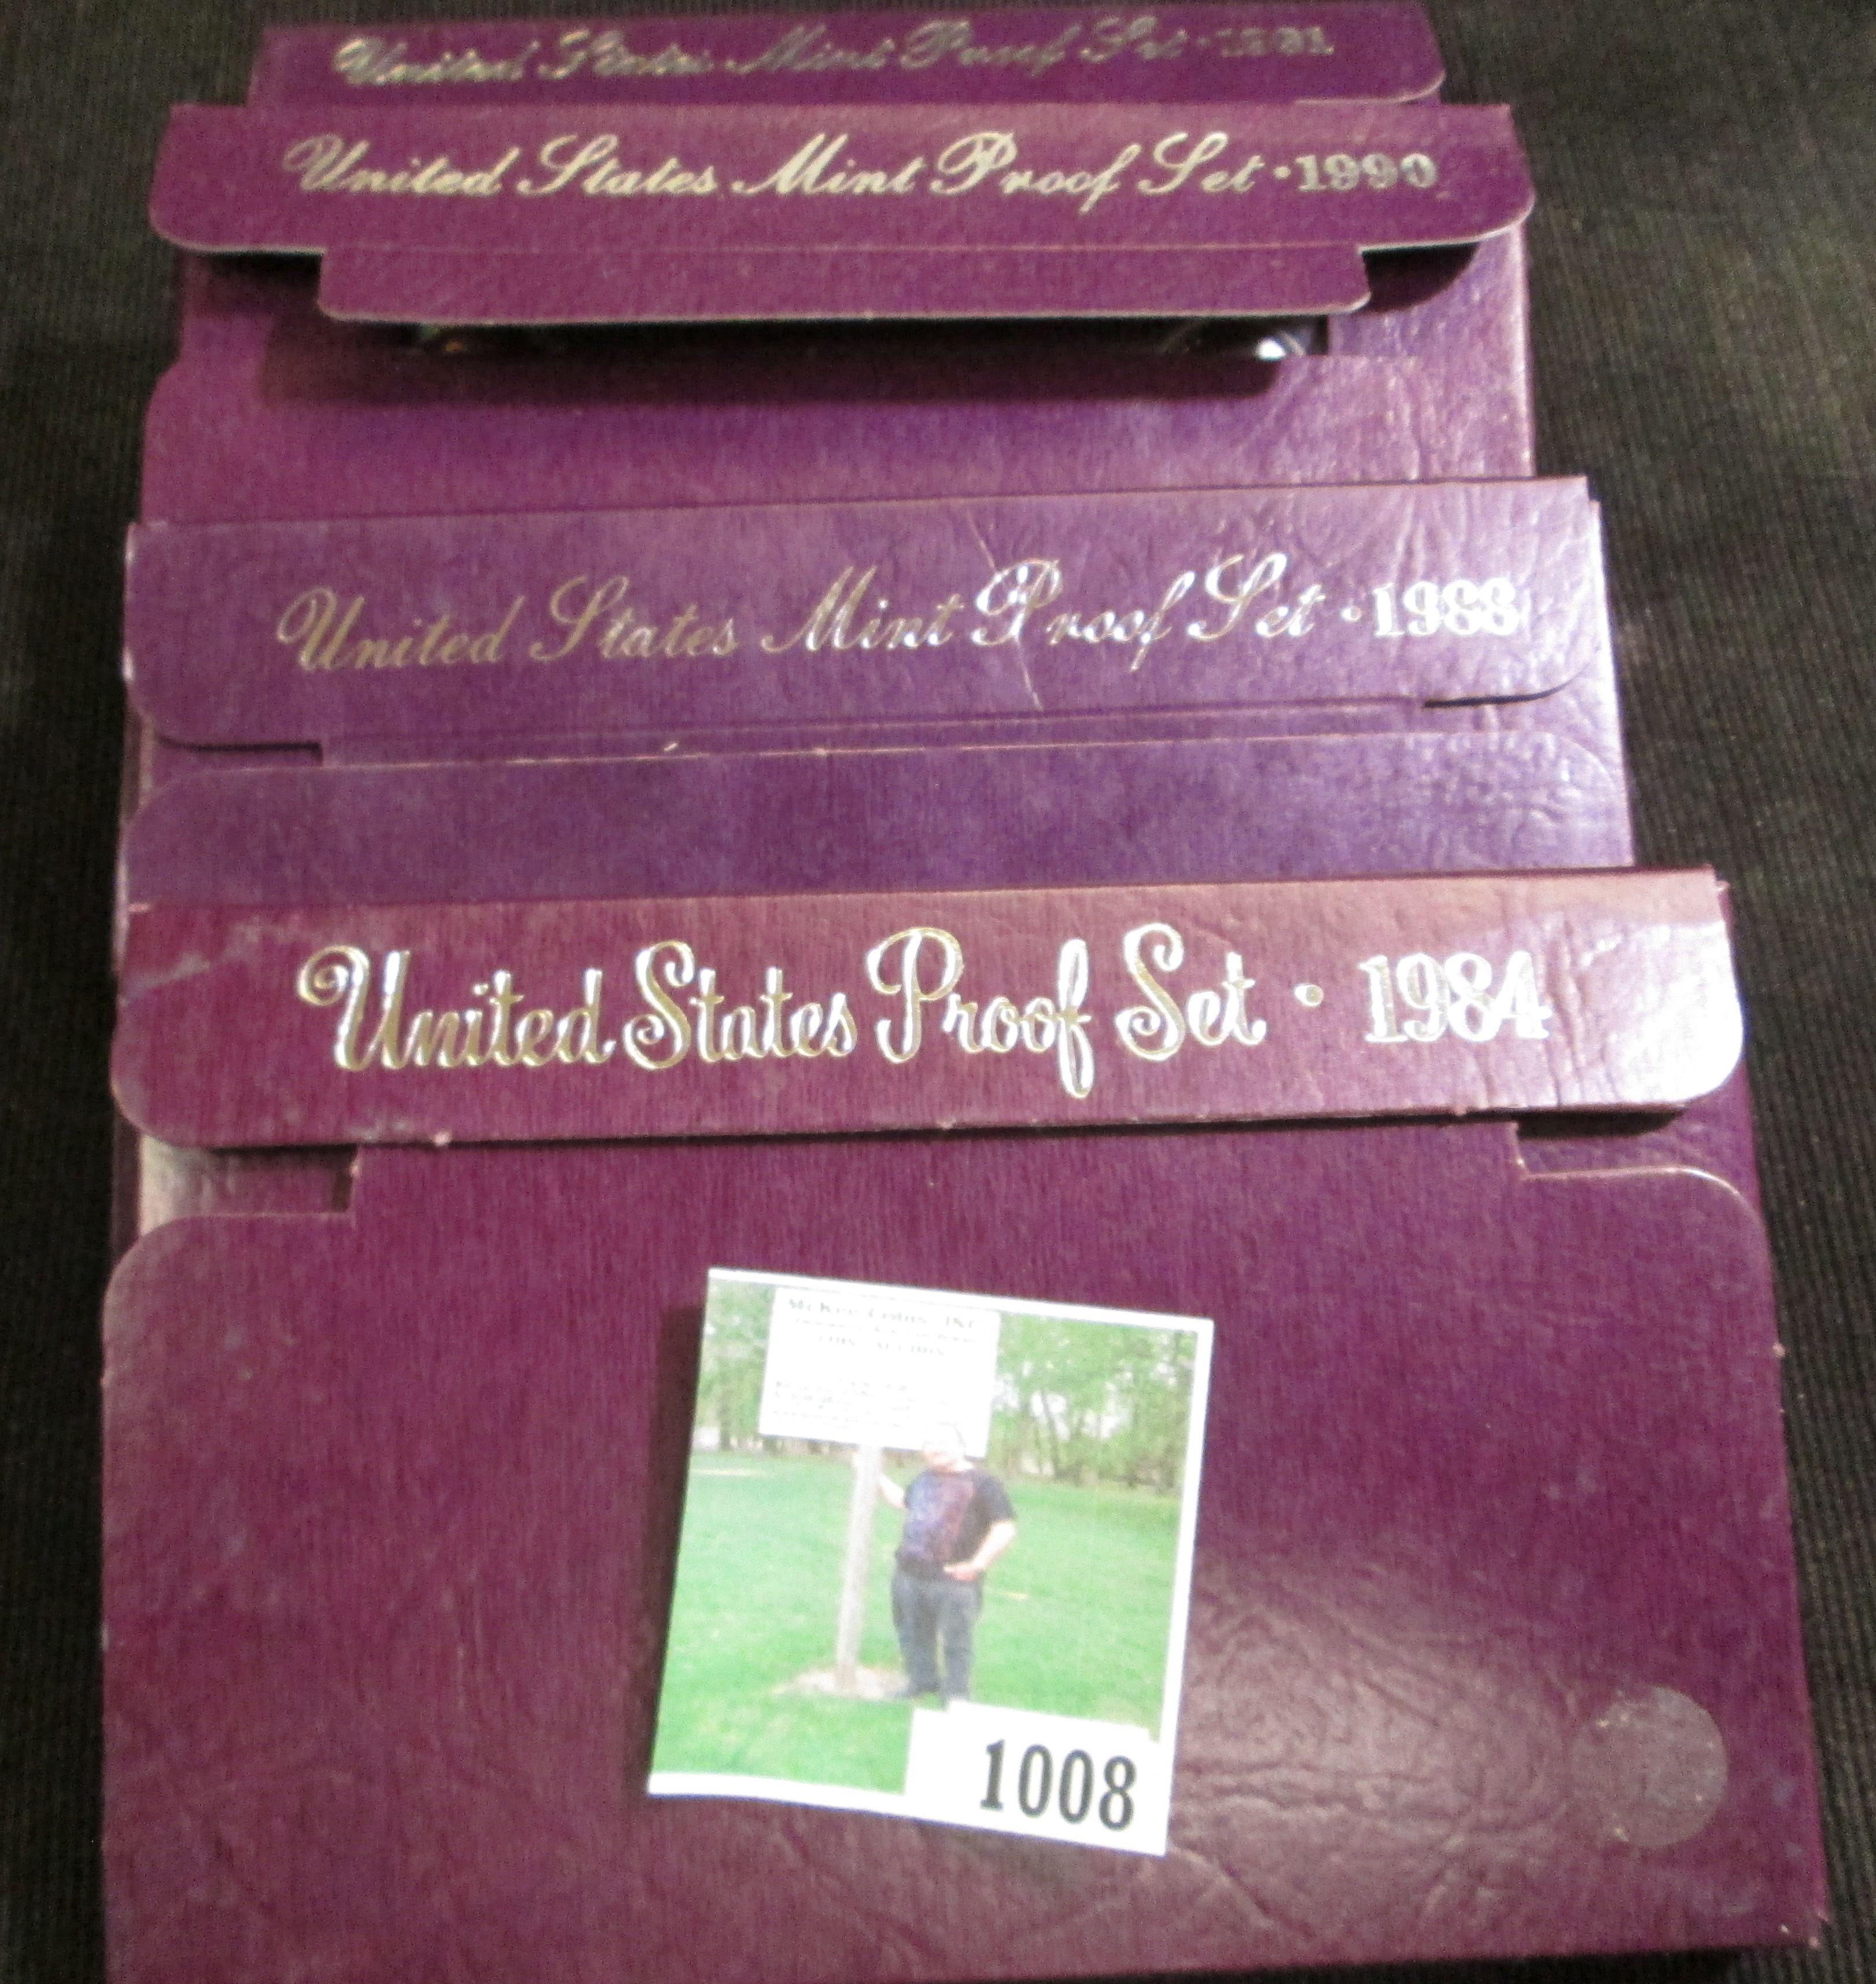 1984 S, 1988 S, 1990 S, & 1991 S U.S. Proof Sets in original boxes of issue.